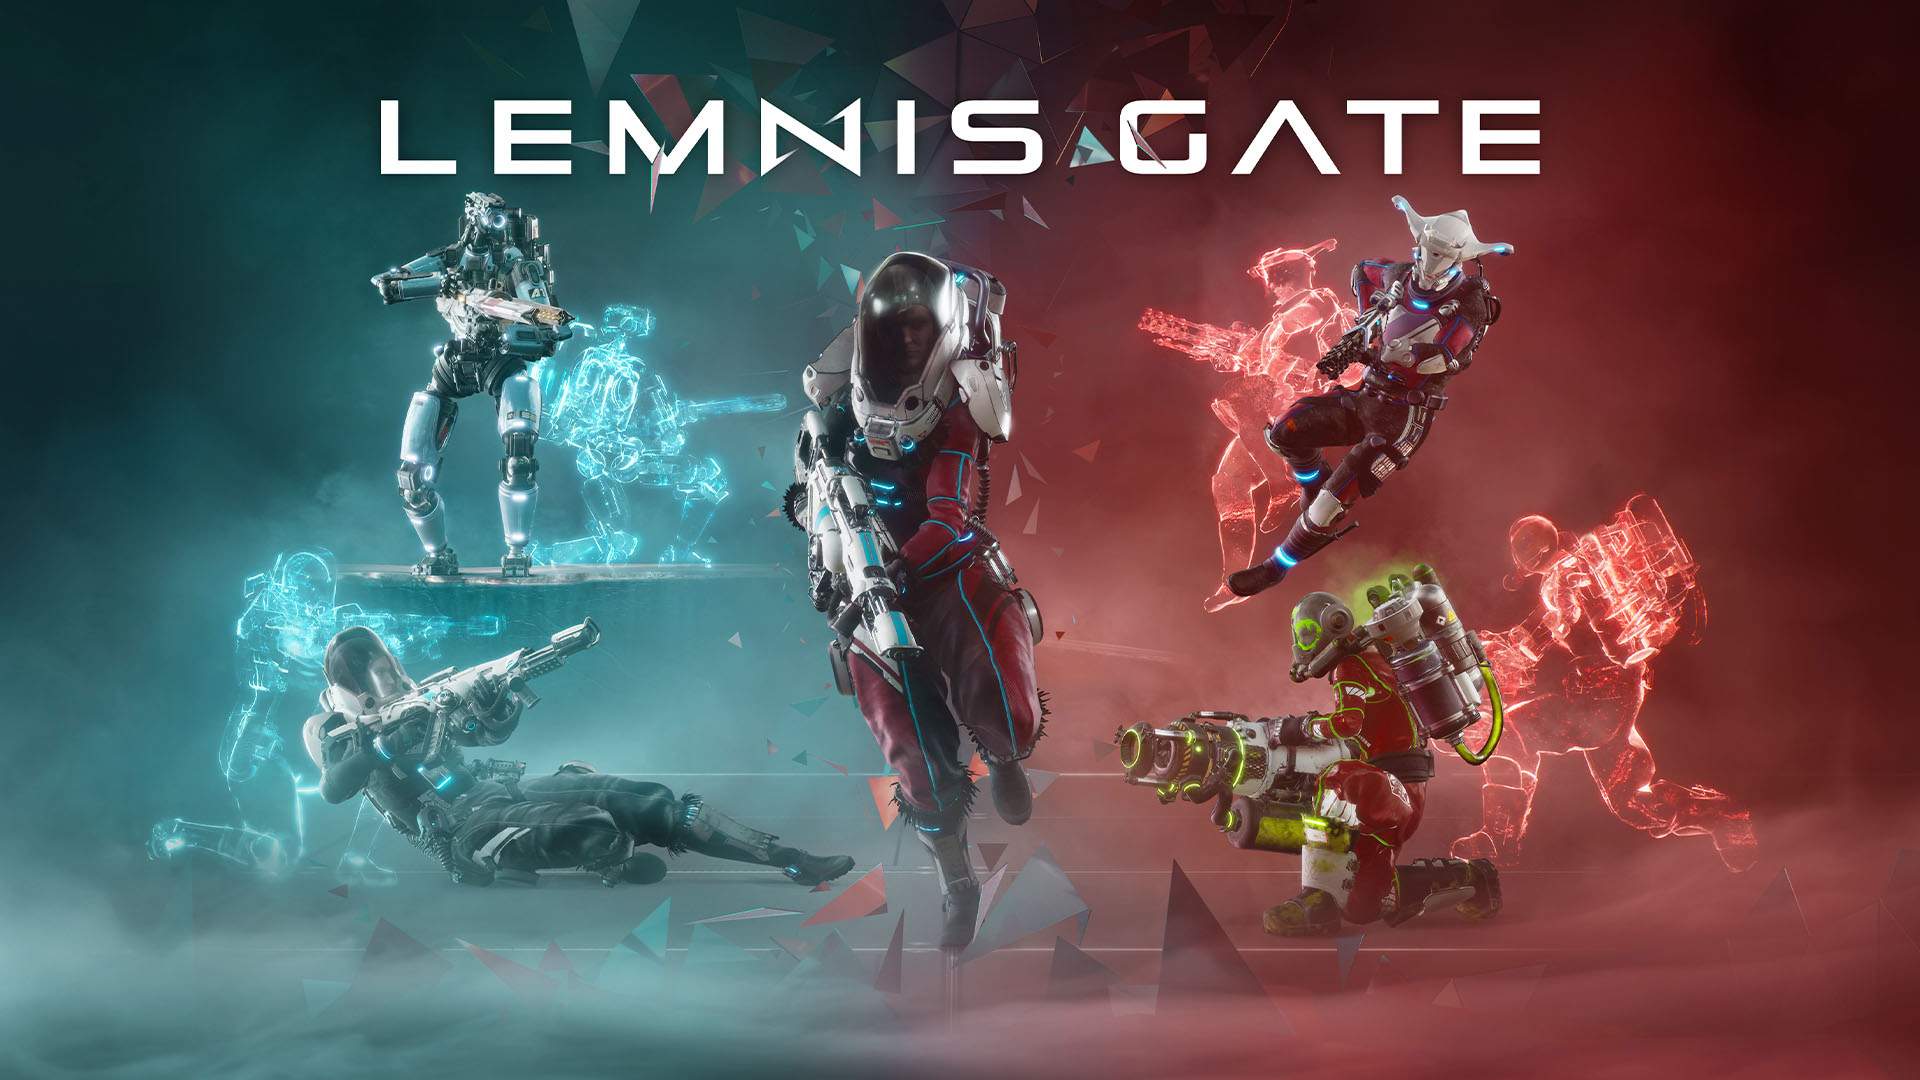 Image for Let’s play Lemnis Gate, a new type of FPS on Game Pass that'll mess with your mind